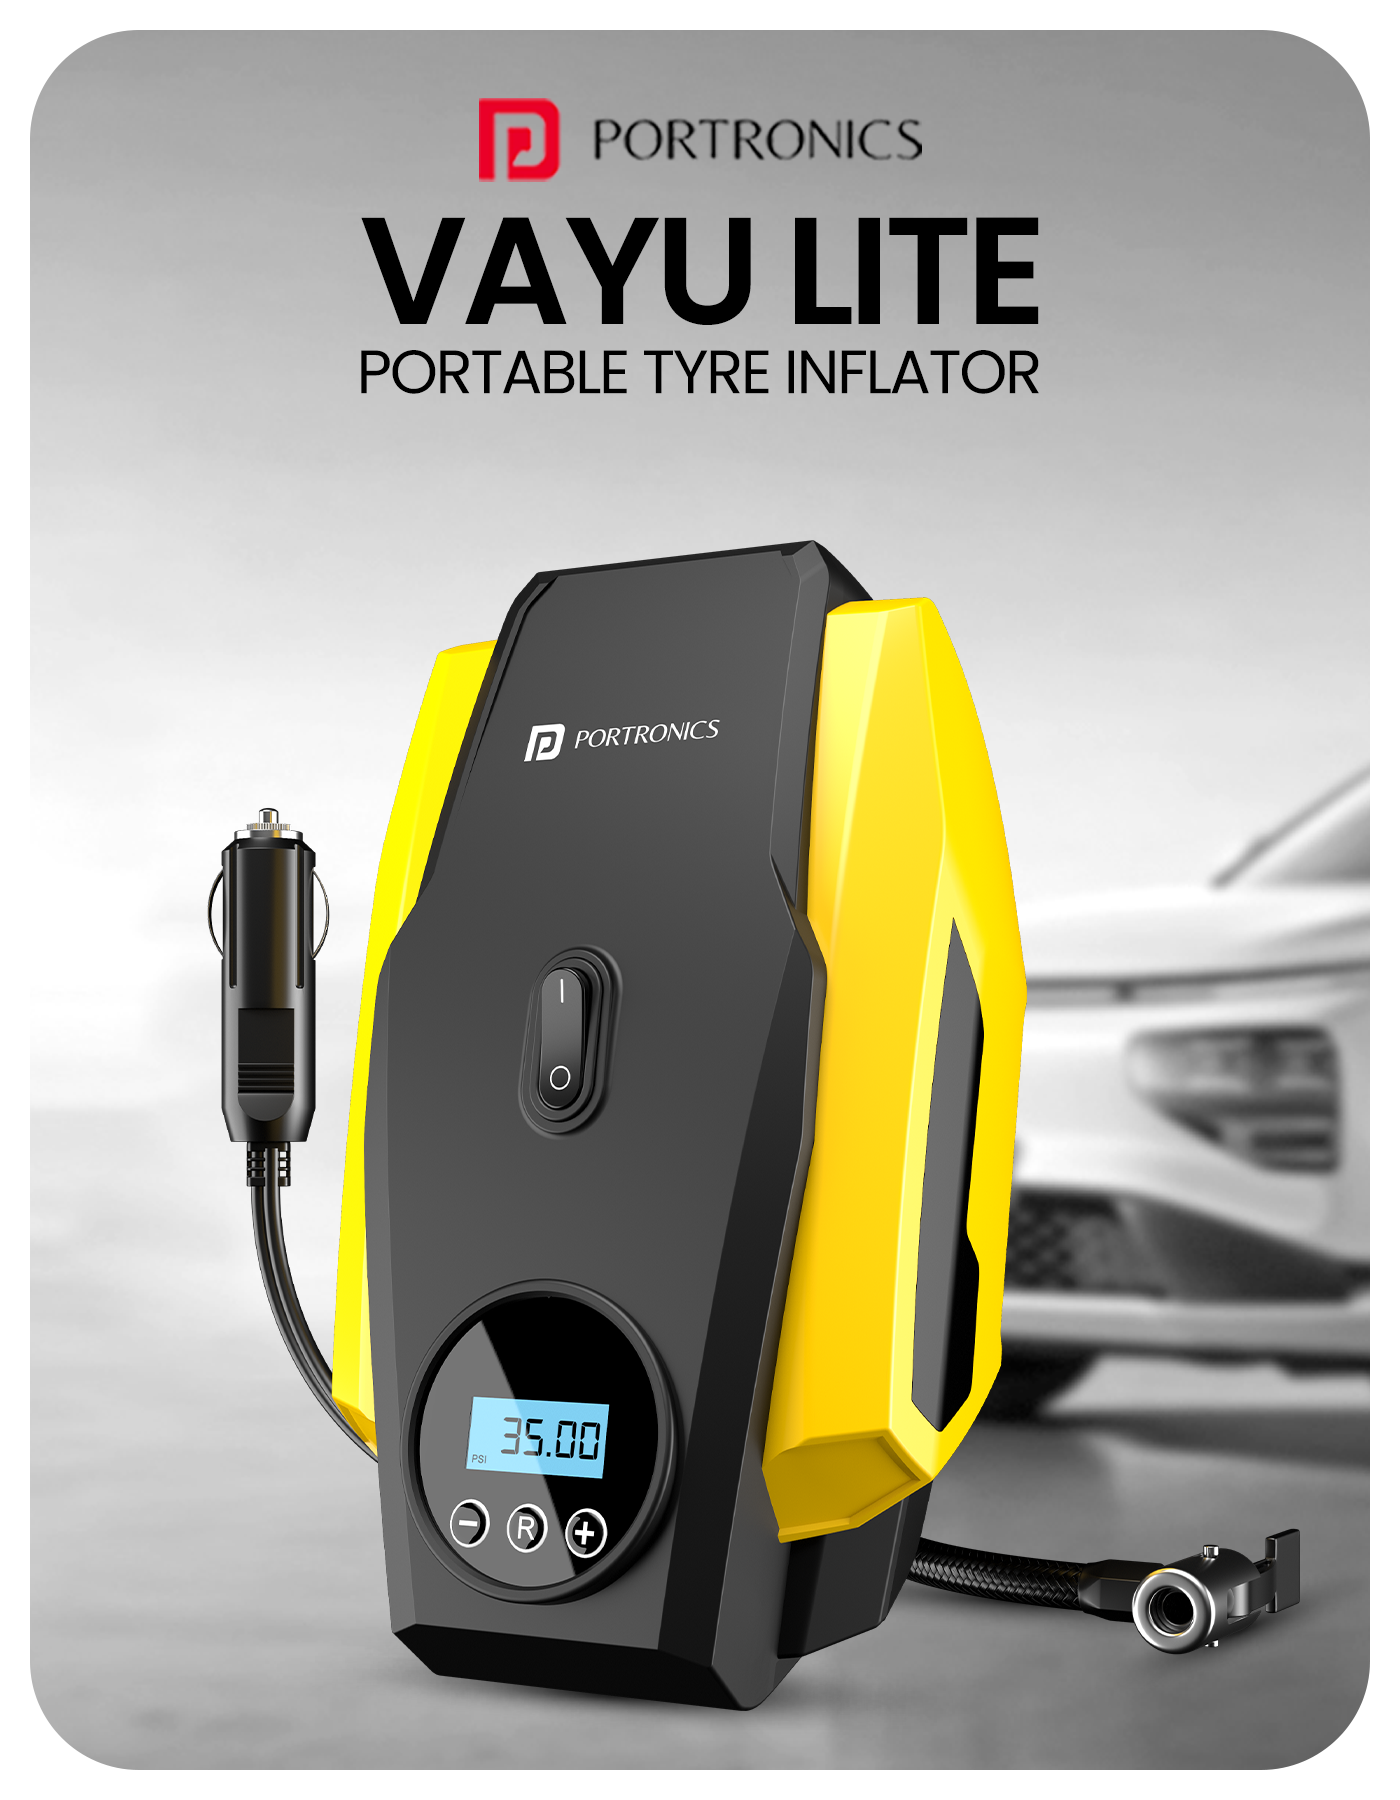 Portronics VAYU lite Portable Tyre Inflator for car automatic feature